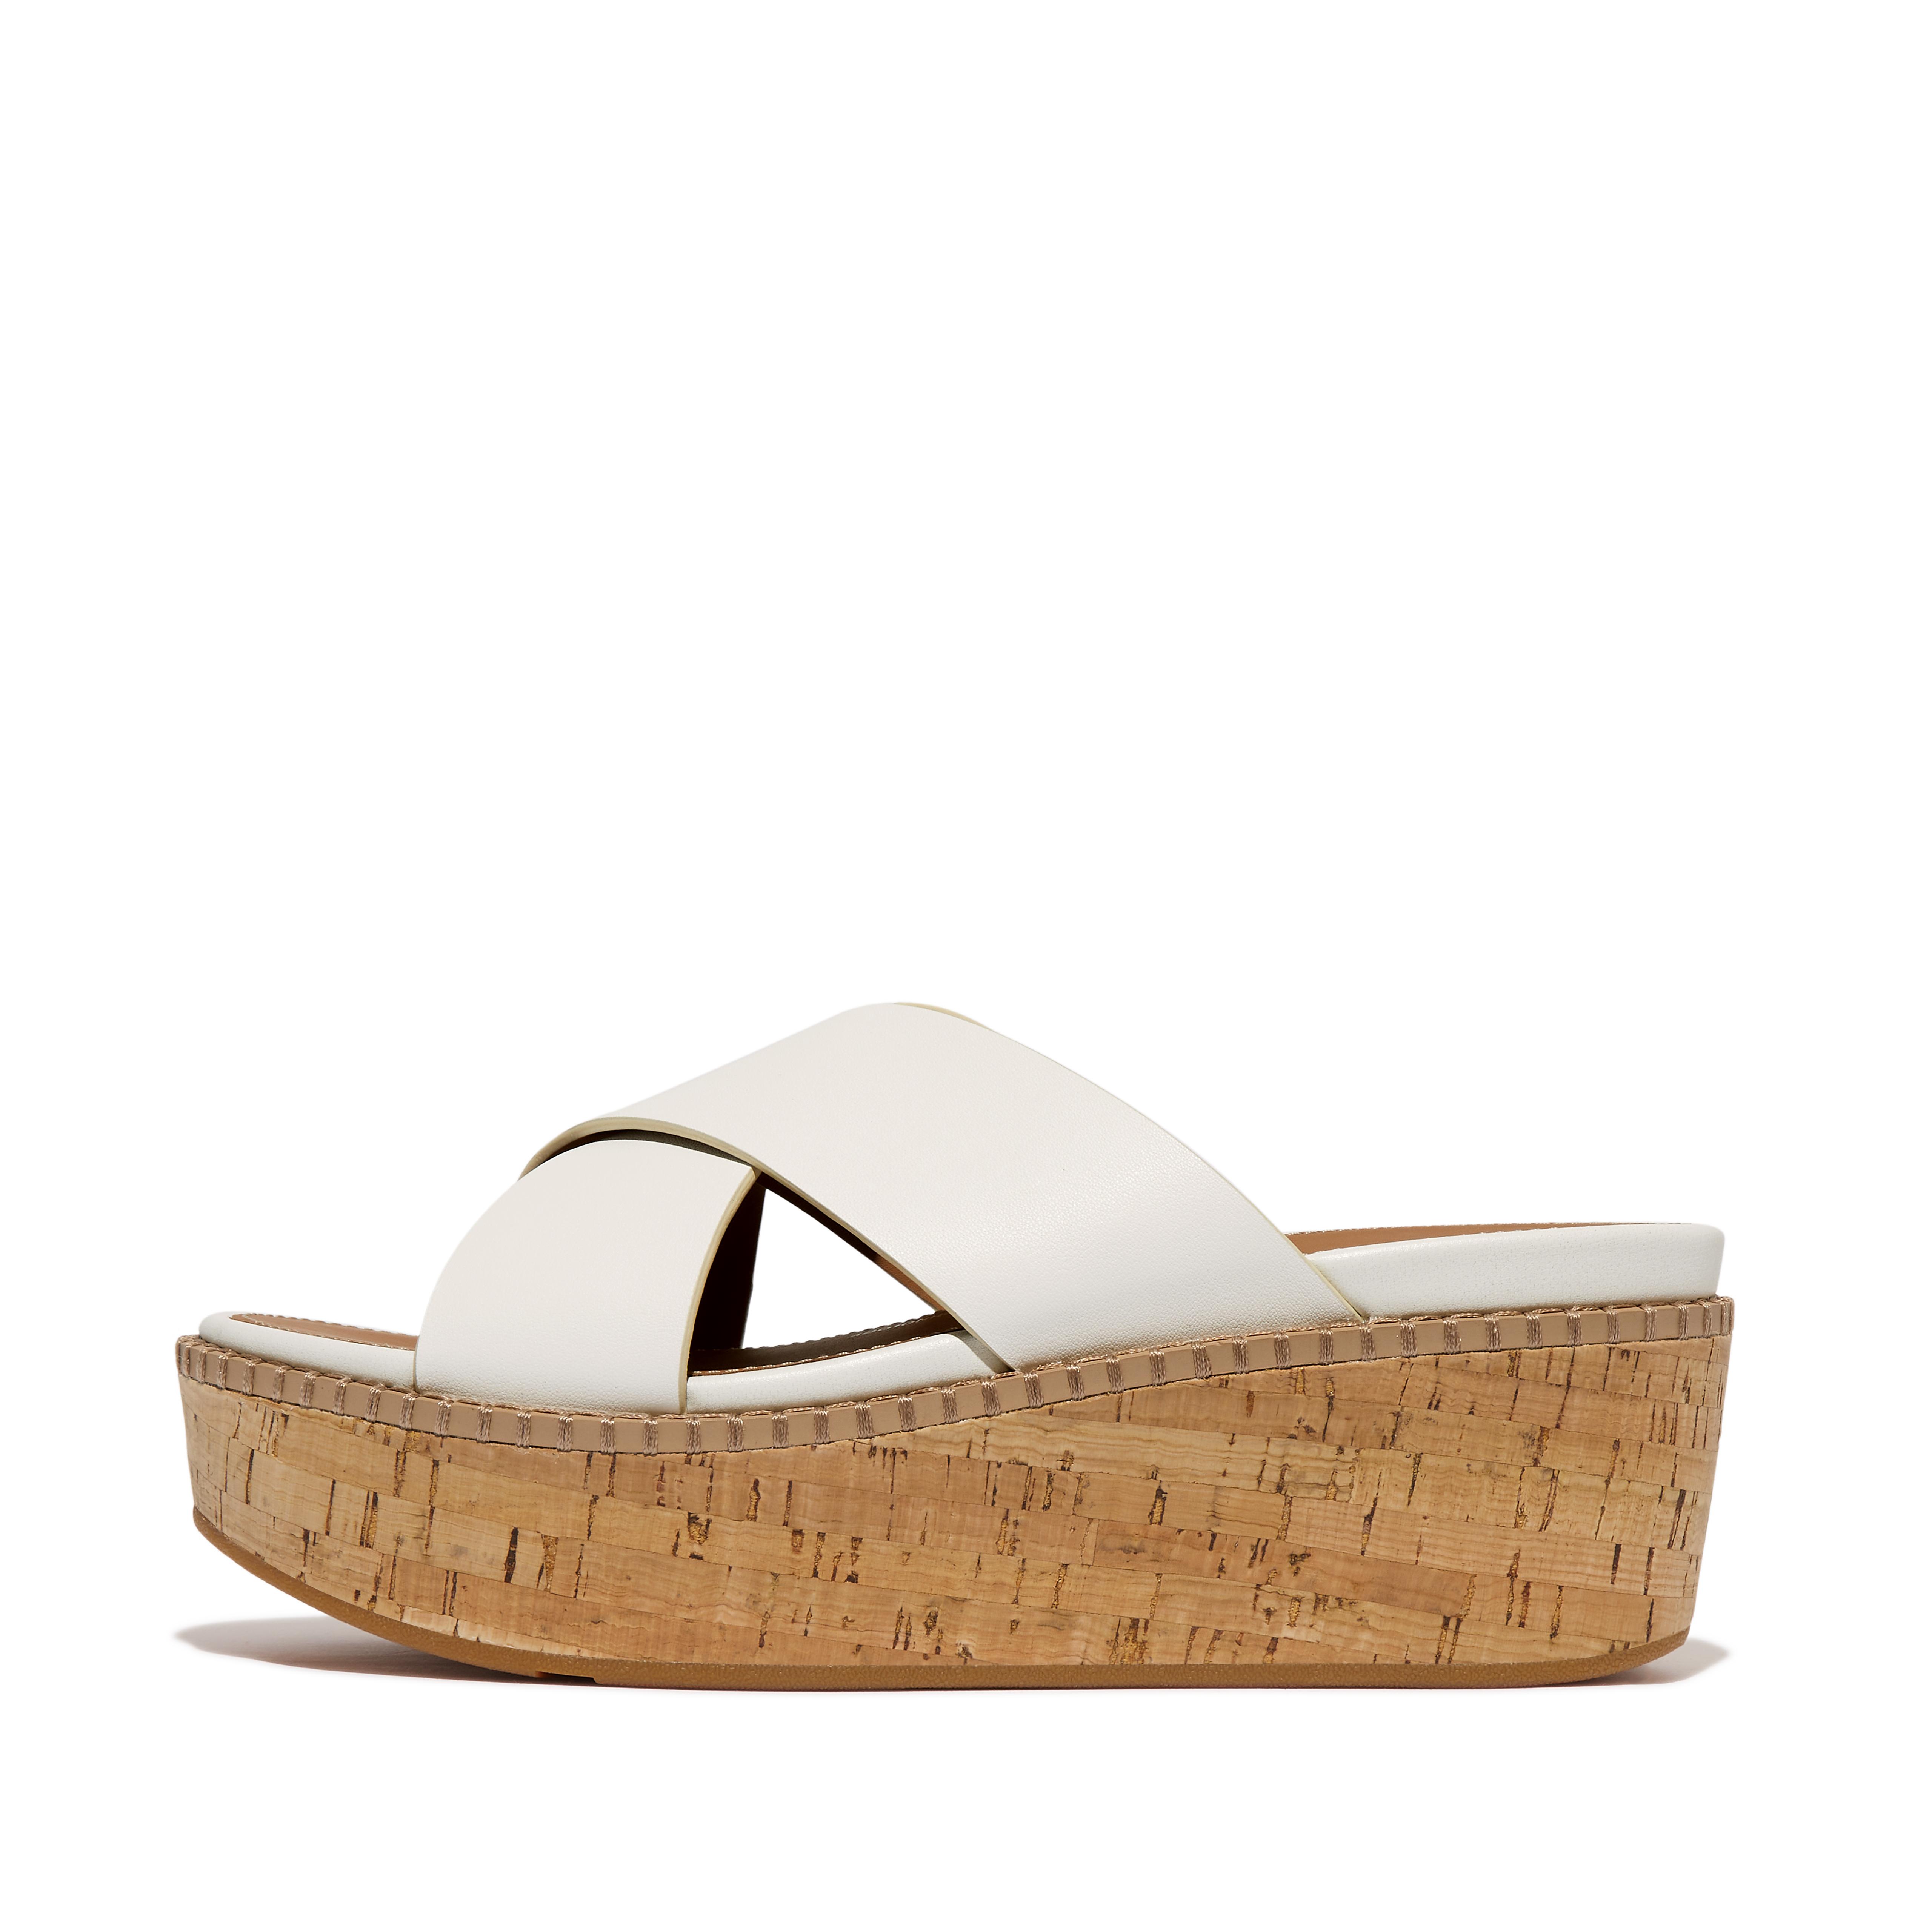 Fitflop Leather/Cork Wedge Cross Slides,Urban White